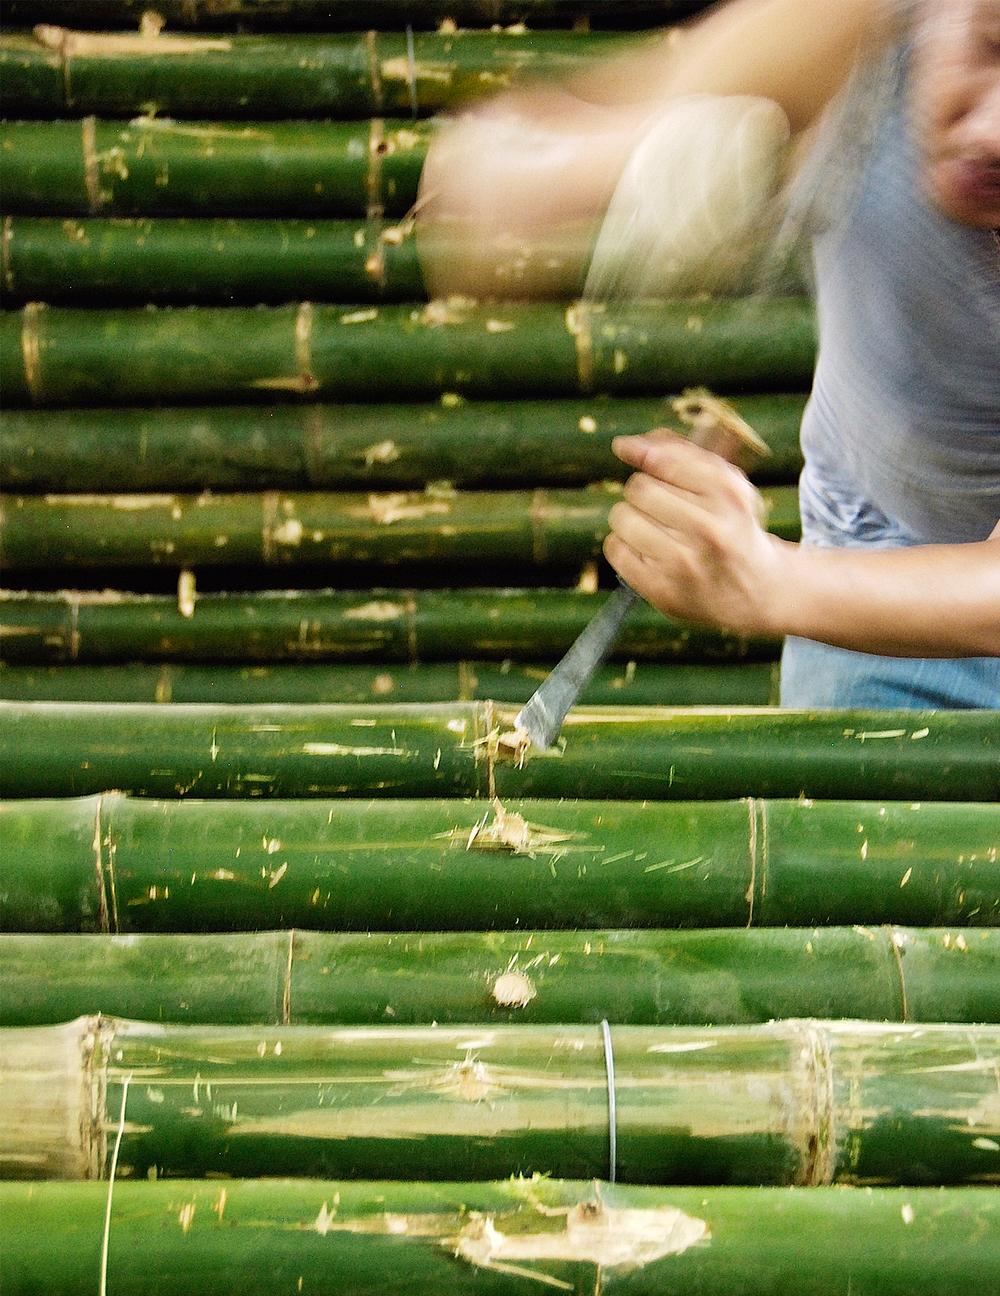 Bamboo, dubbed ‘green steel’, is light, strong and highly sustainable, needing only four years to grow to maturity